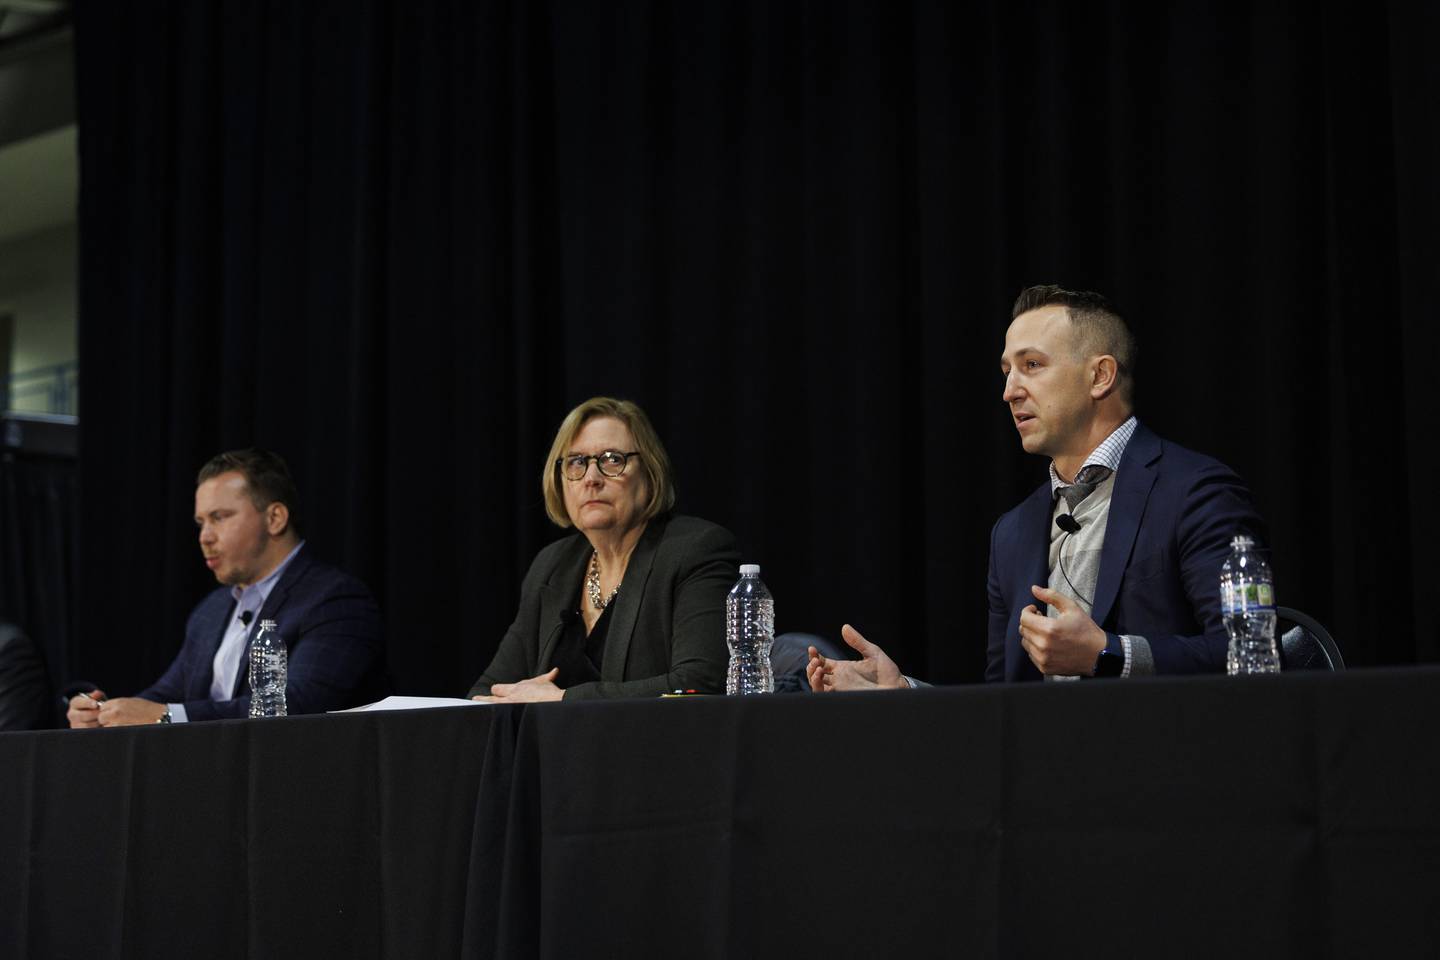 Chris Jewett, from left, vice-president of corporate development at Bally’s; Christine Carlyle, Principal and Director of Planning at Solomon Cordwell Buenz; and Brad McCauley, Managing Principal at Site Design Group, answer questions from the public during a Chicago casino town hall at the Freedom Center on Dec. 5, 2022, in Chicago. 